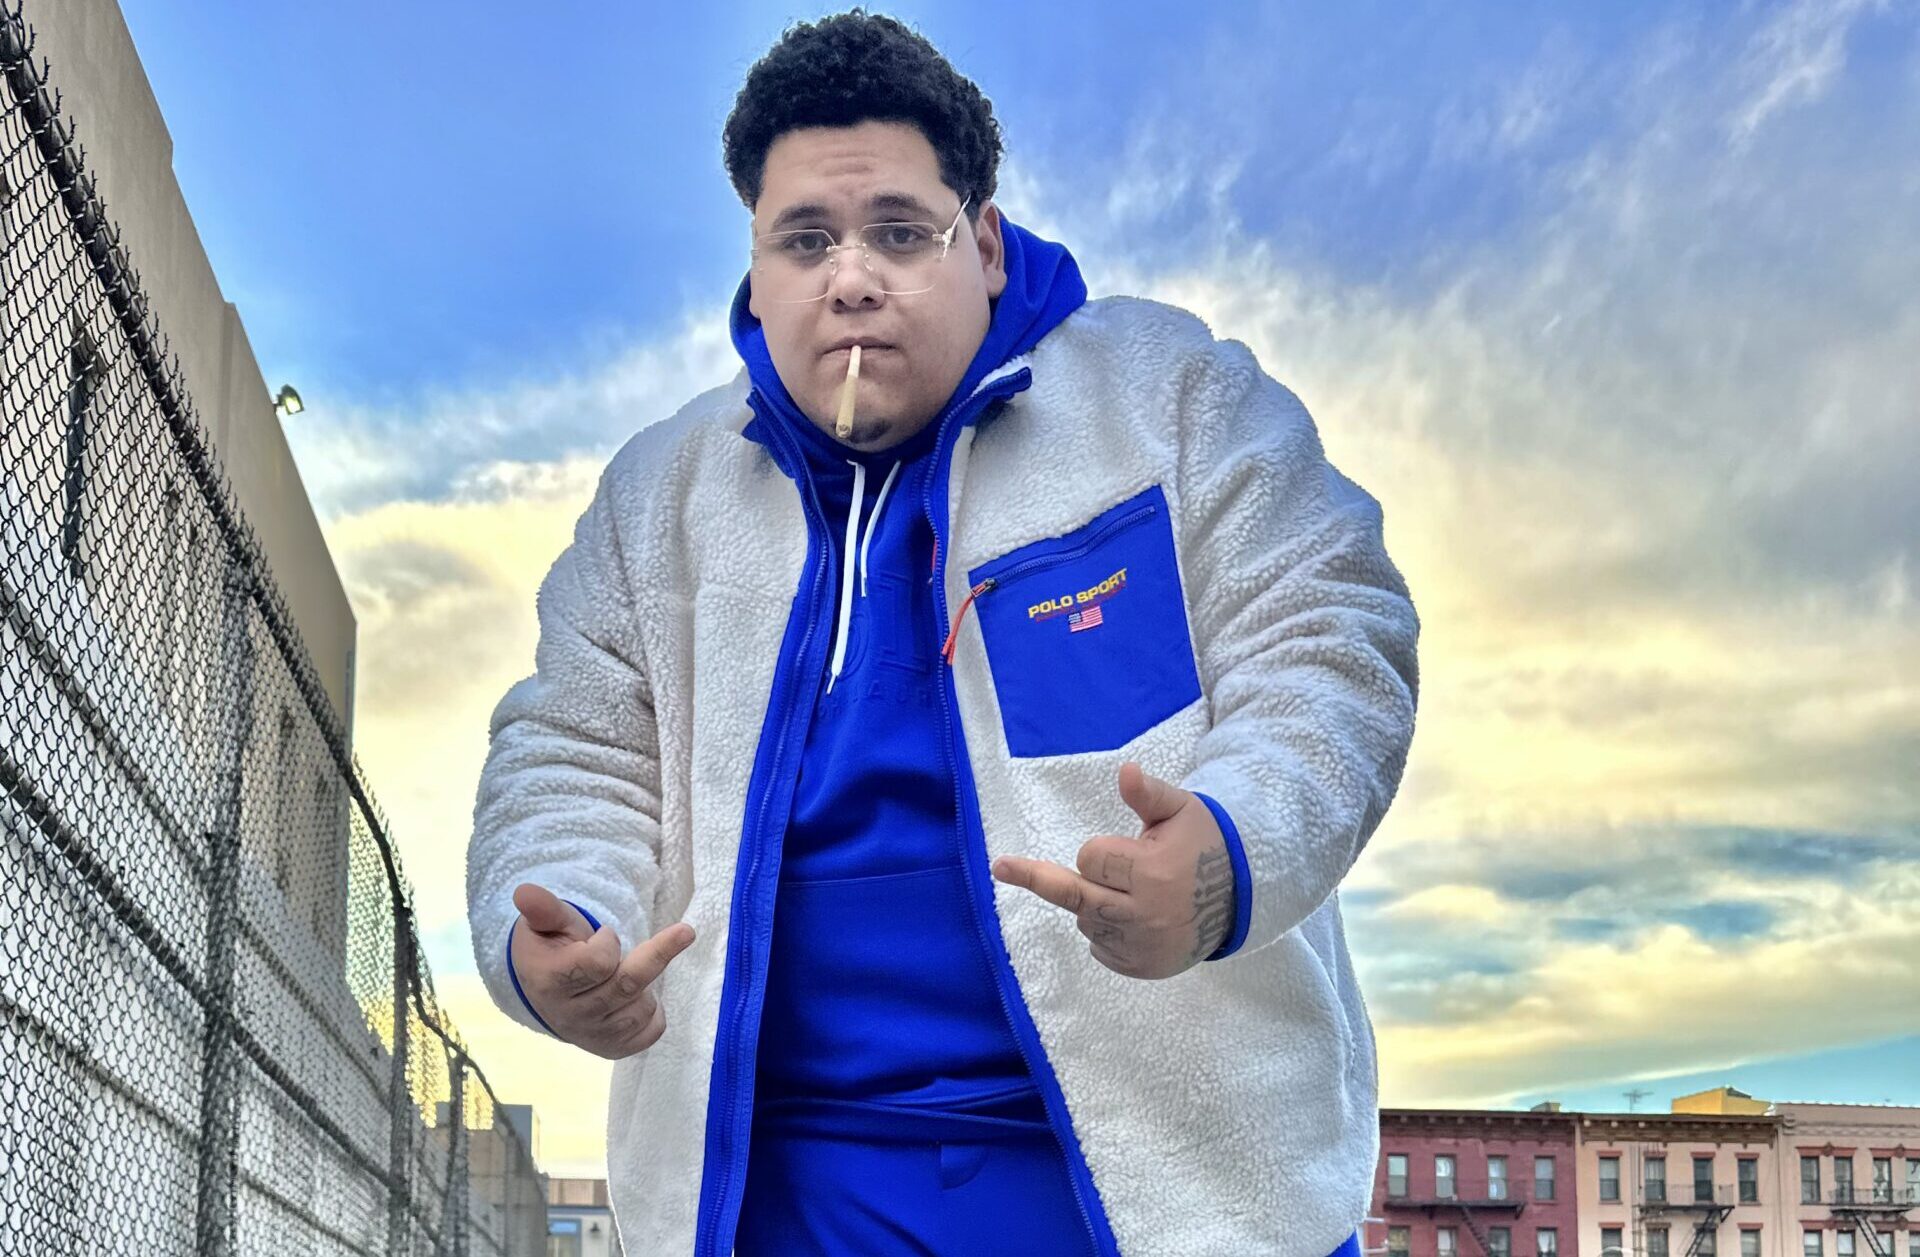 Brooklyn-Based Hip Hop Artist l.P.K. Titan Set to Conquer the Music Scene with Sophomore Project, "Unapologetically Selfish"